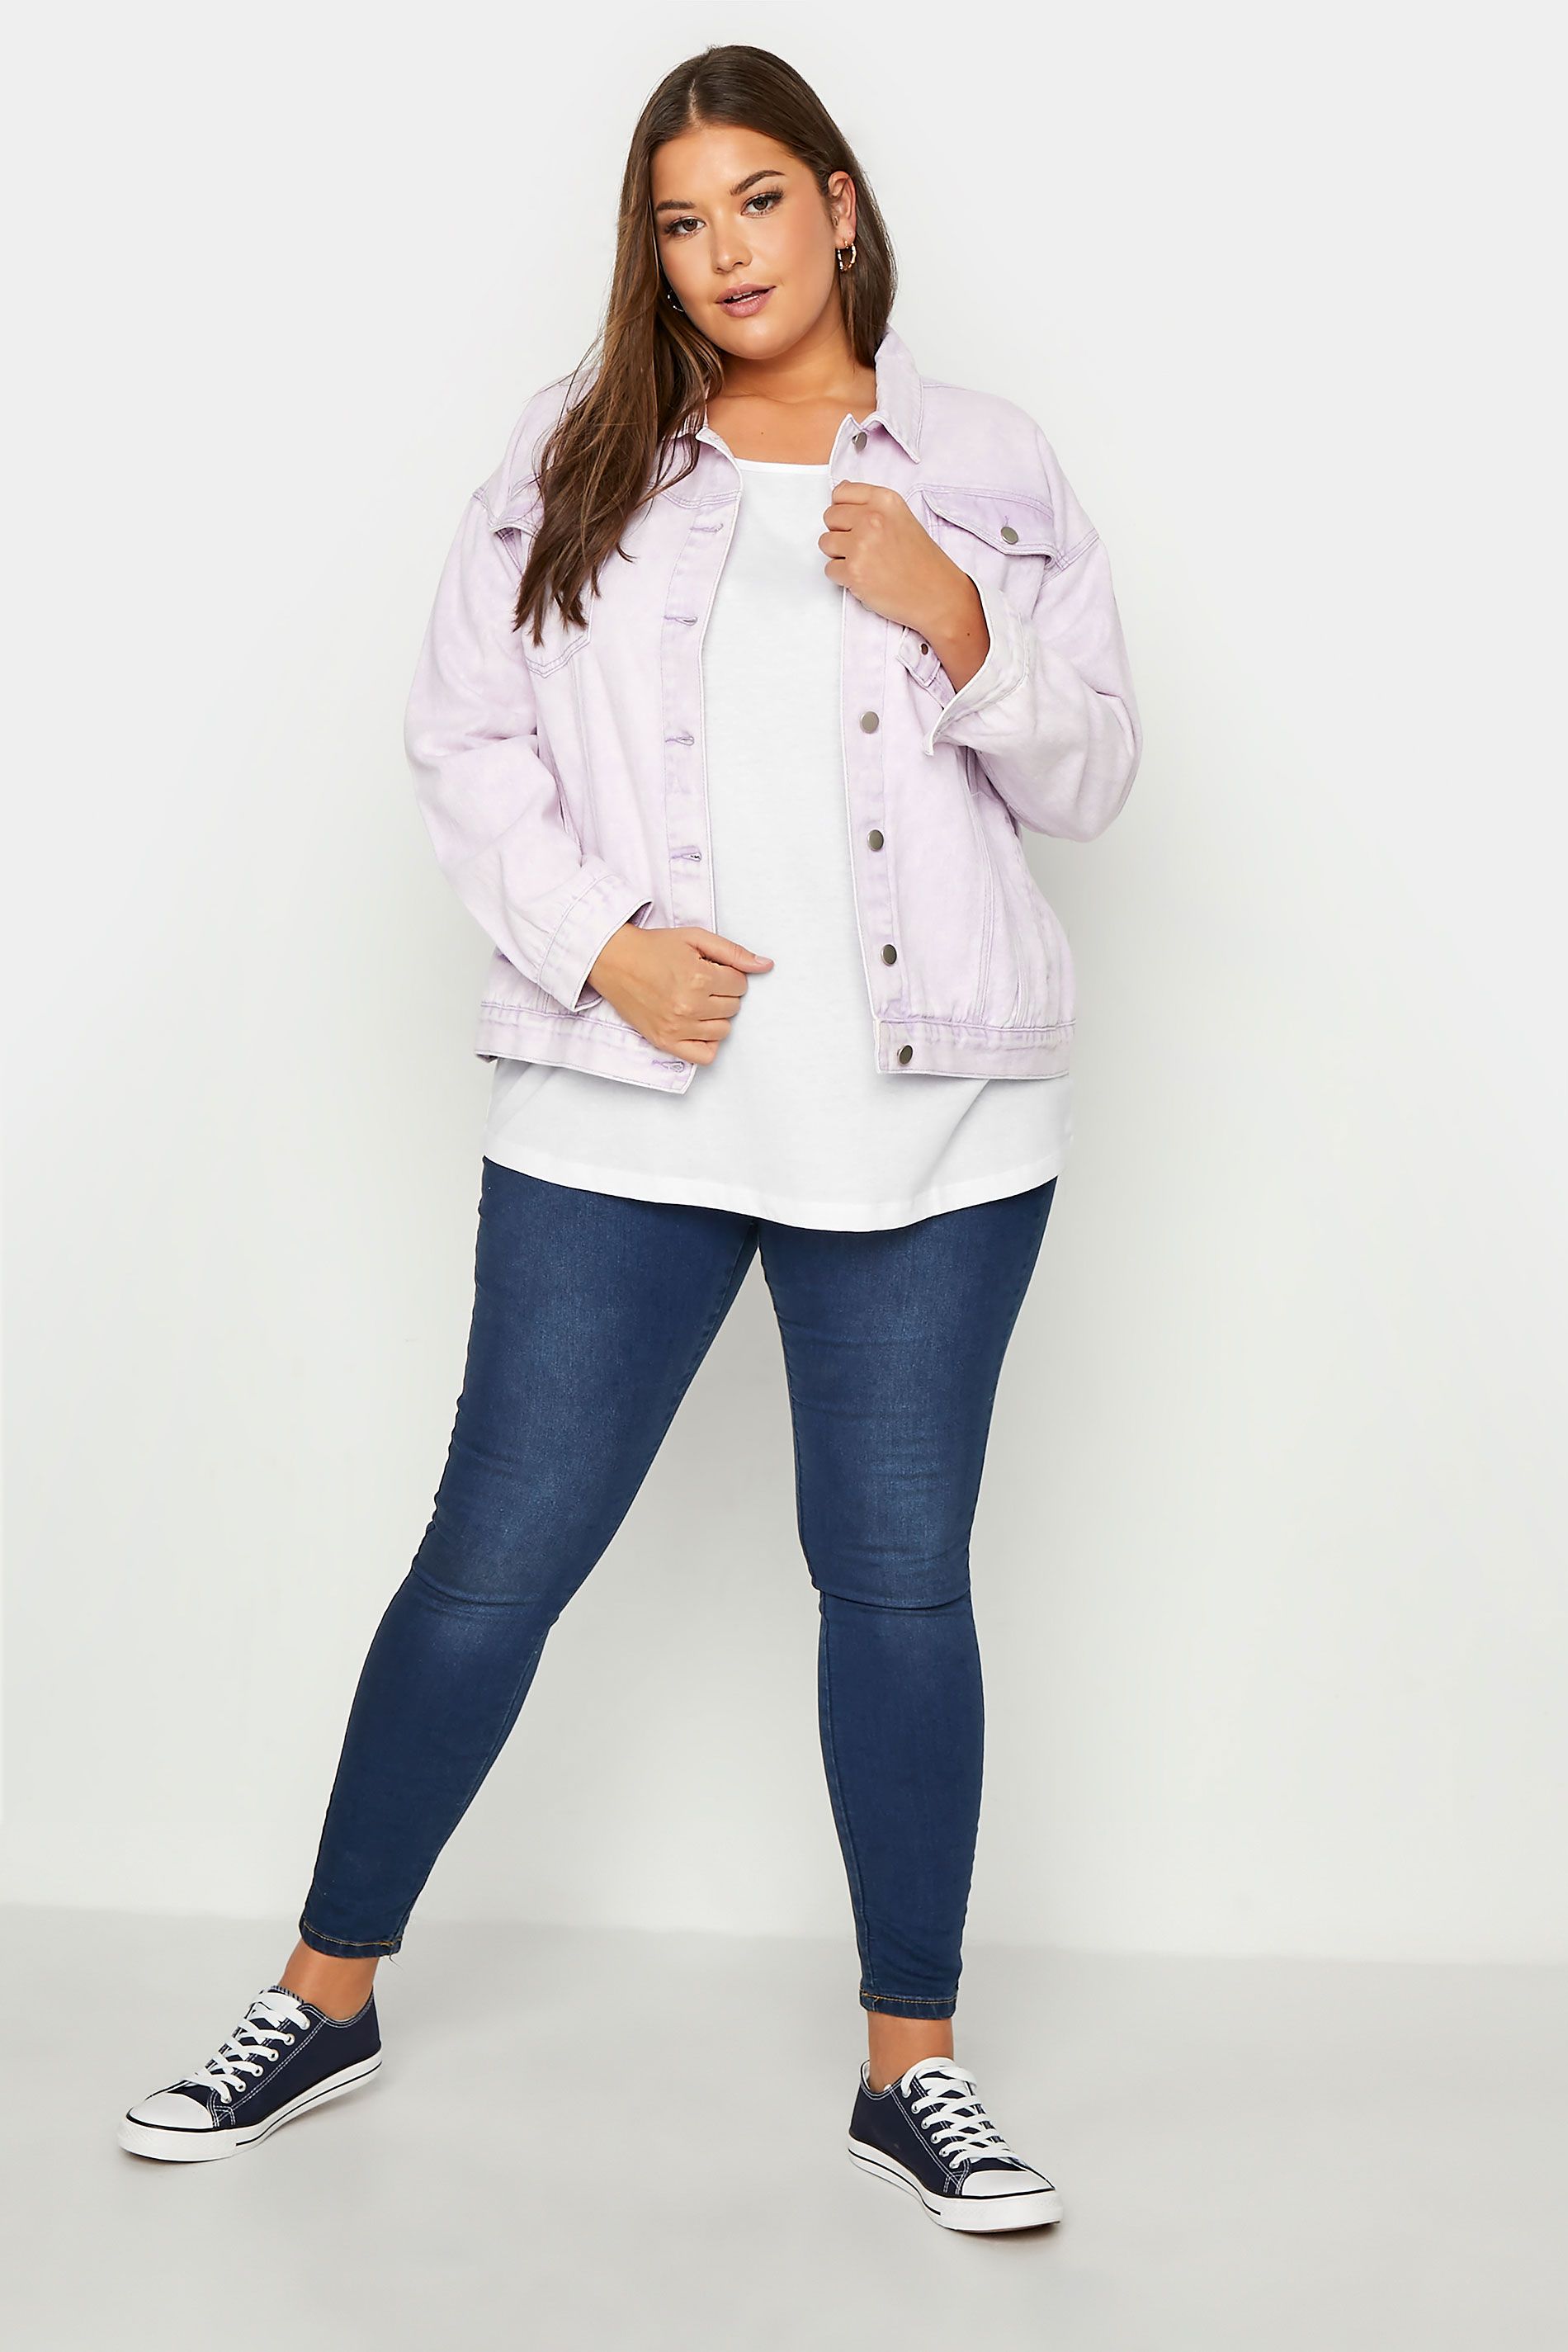 Grande taille  Tops Grande taille  Tops à Manches Longues | T-Shirt Blanc Manches Longues en Jersey - PU46866